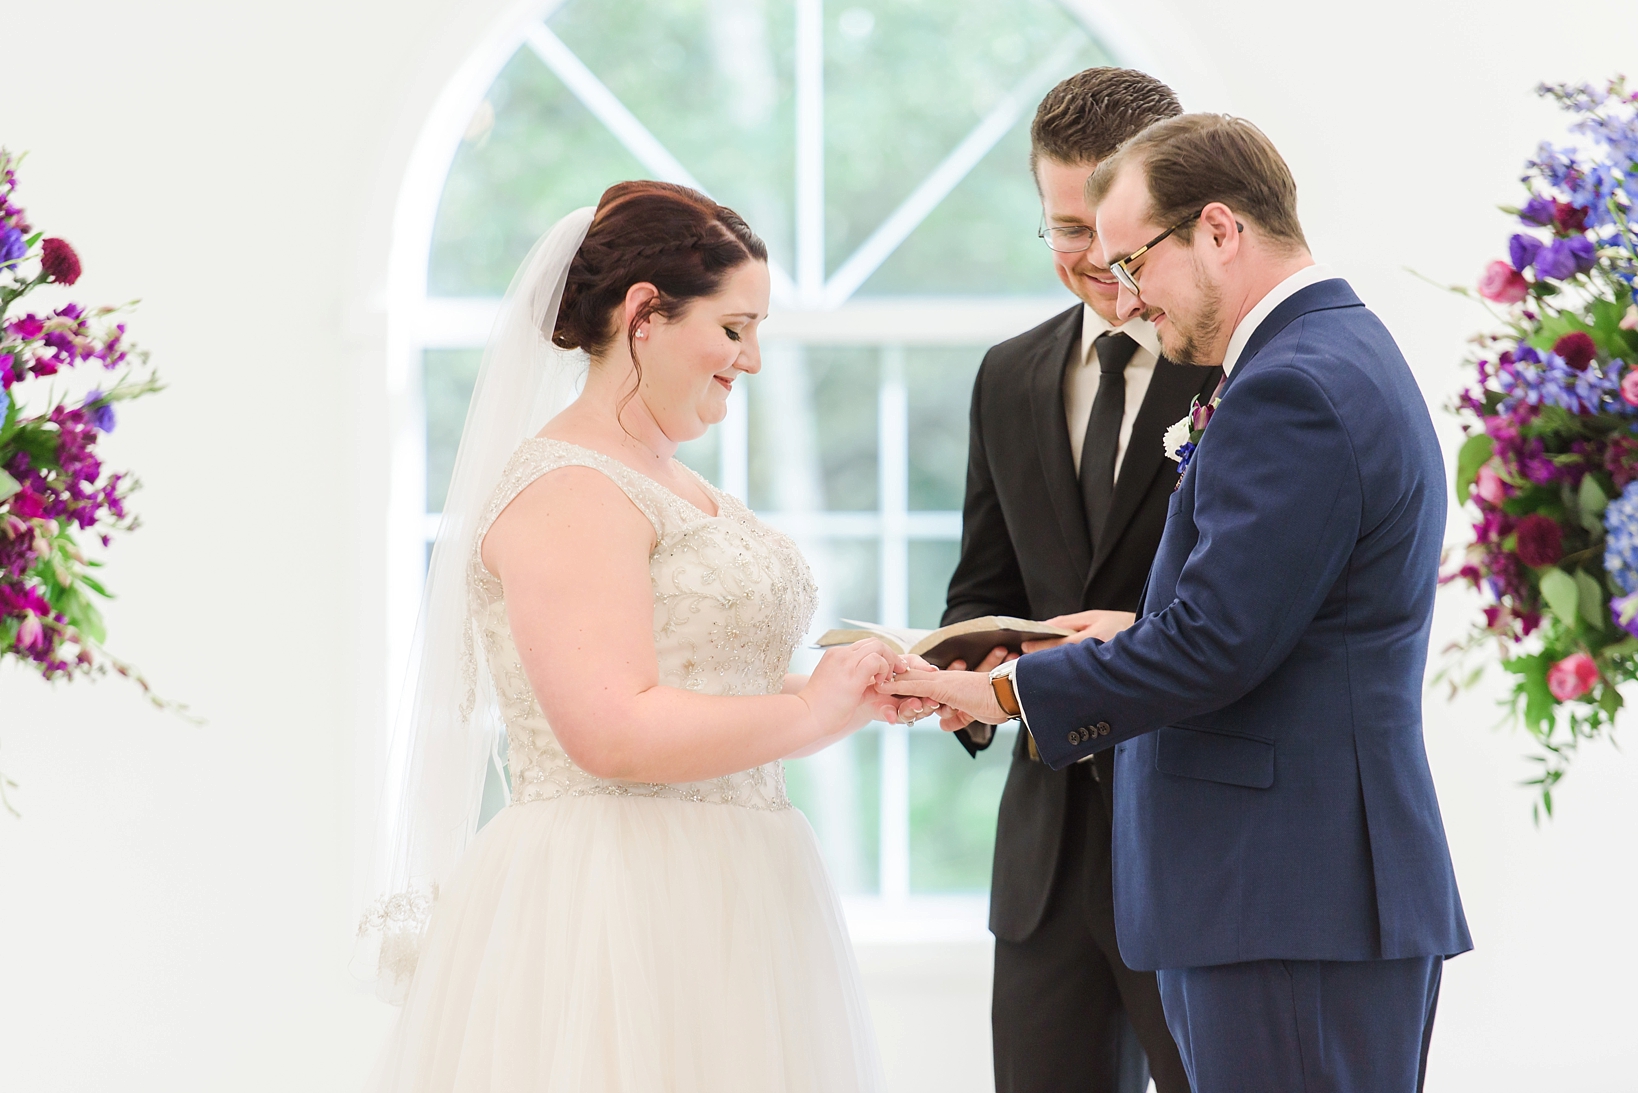 Exchanging rings during the ceremony by Sarah & Ben Photography